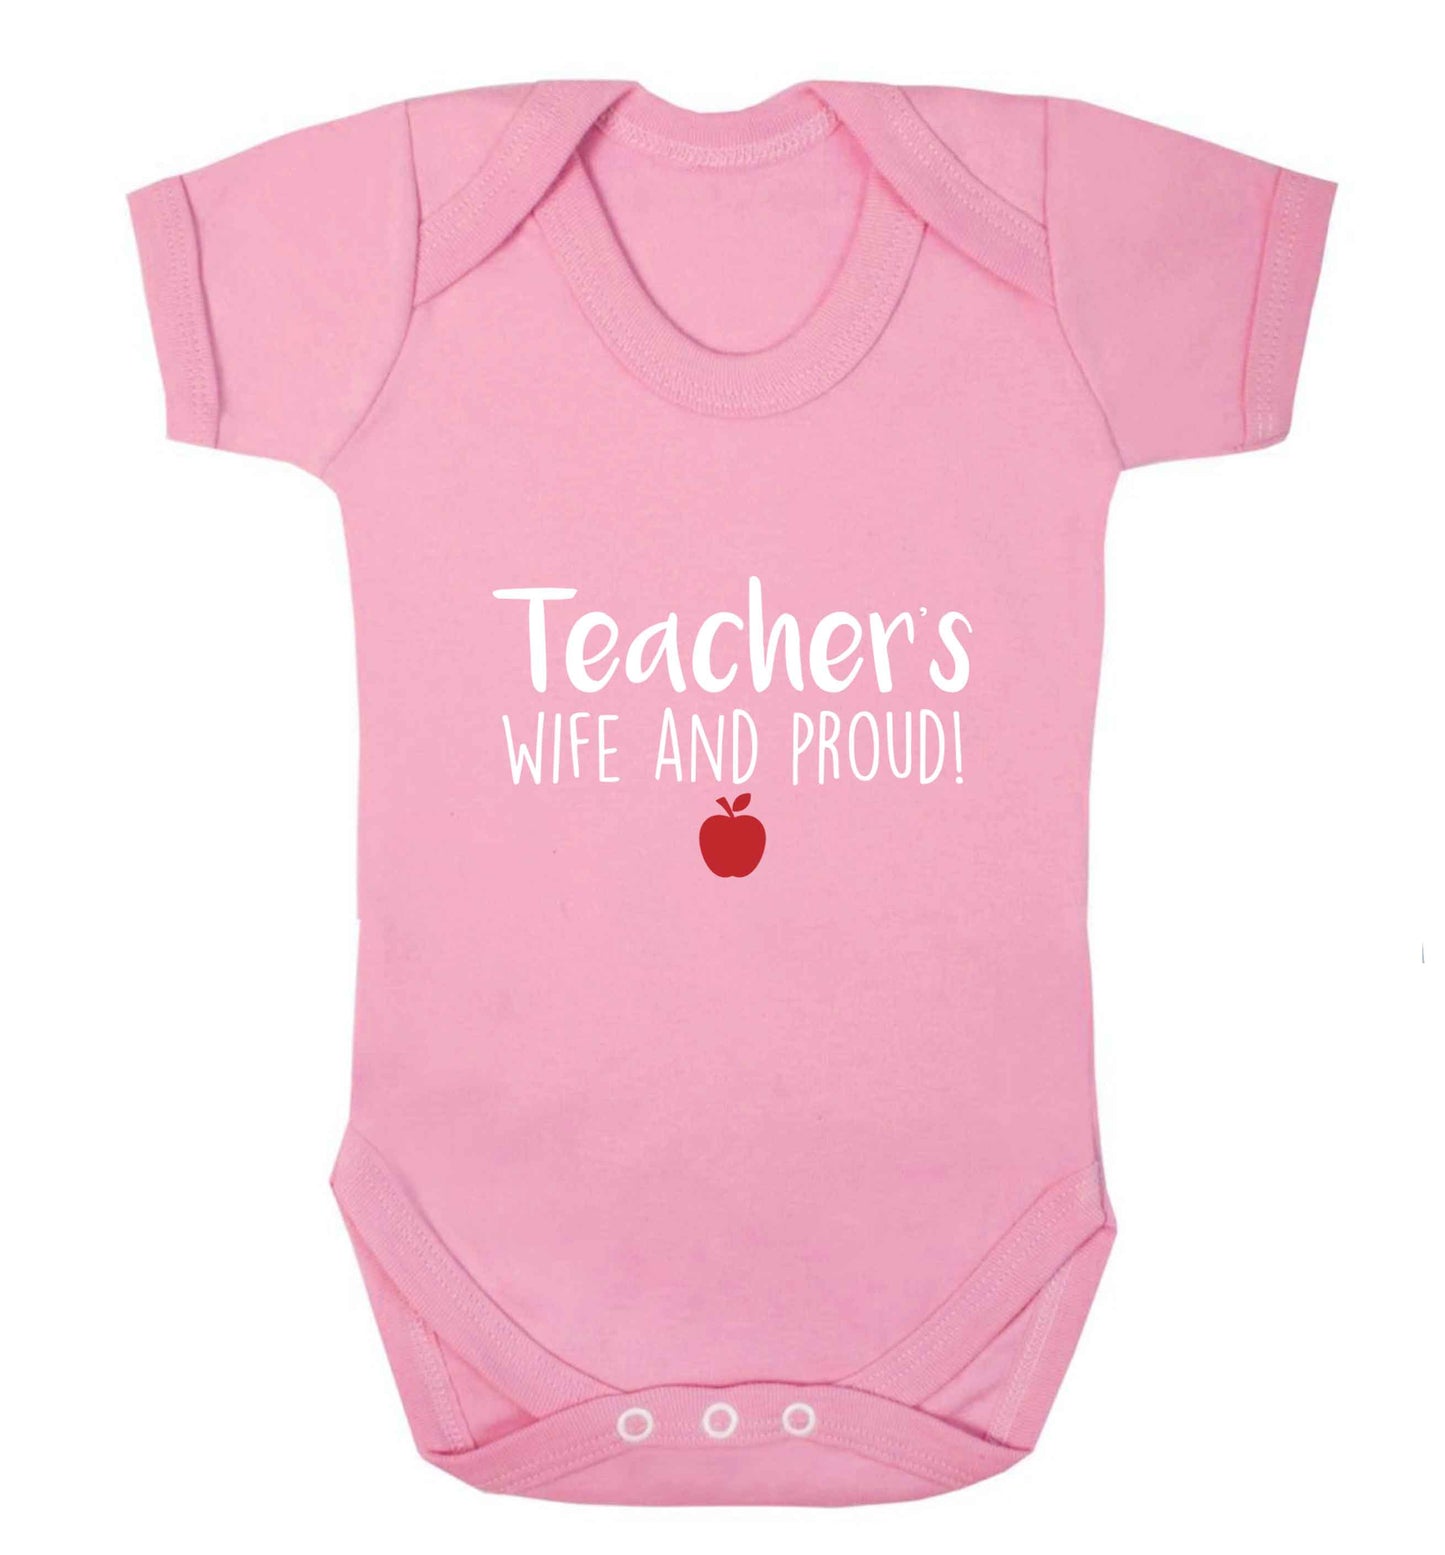 Teachers wife and proud baby vest pale pink 18-24 months